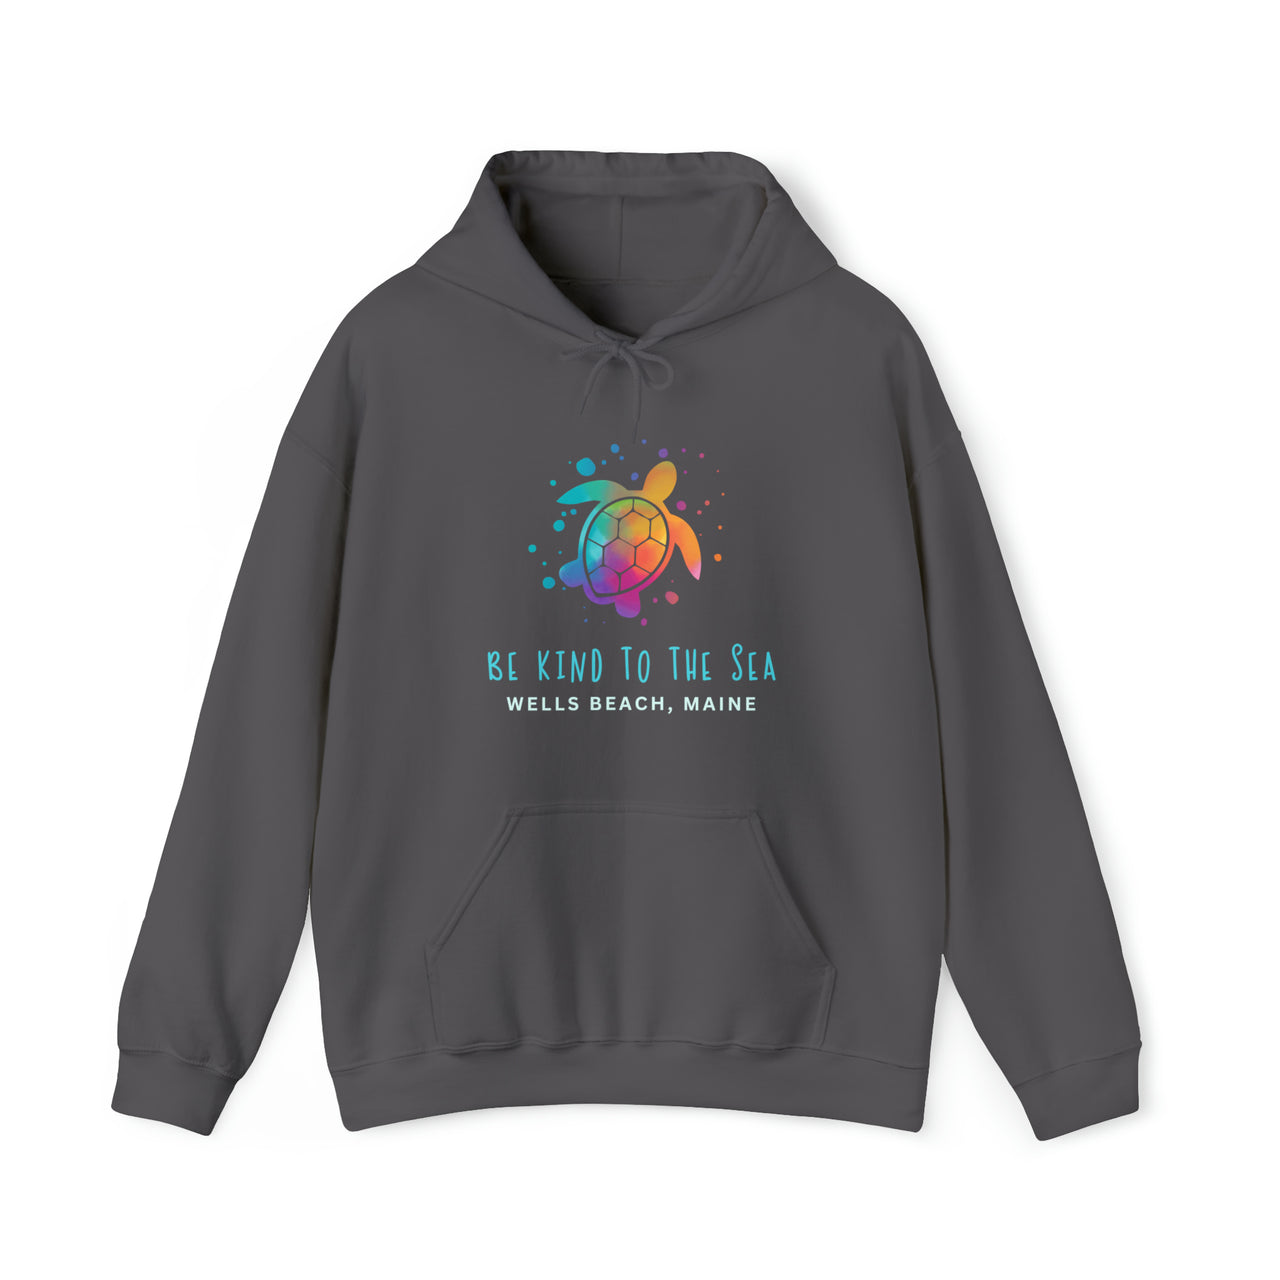 Be Kind to the Sea Heavy Blend Hooded Sweatshirt, Personalized, Charcoal